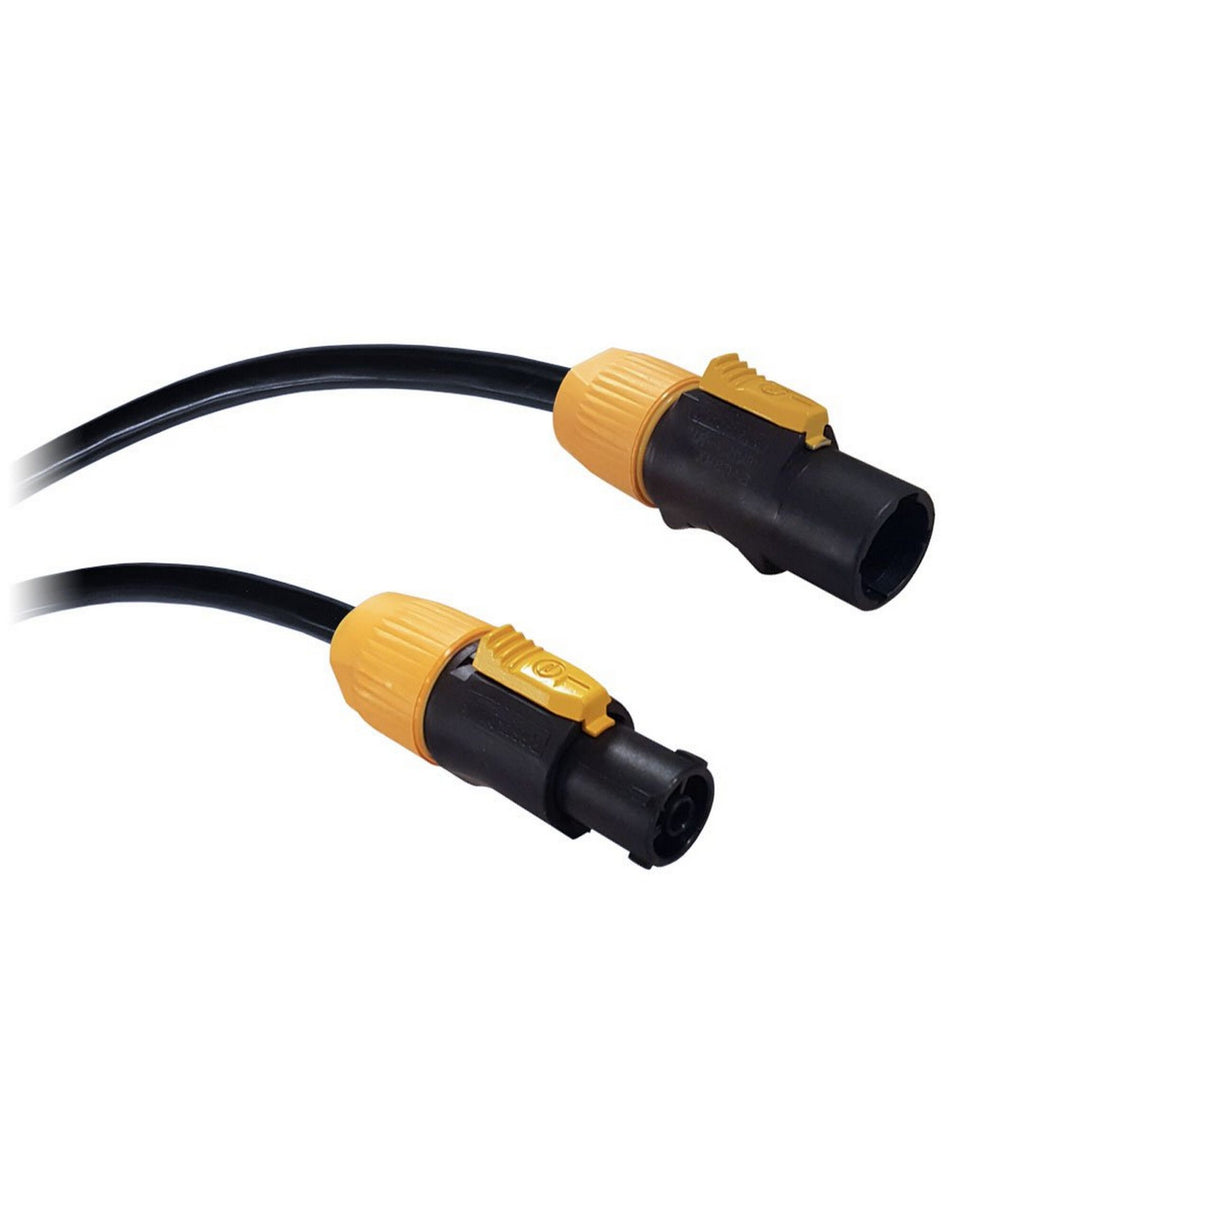 Blizzard Lighting PCT-INTER-1406 powerCON TRUE1 Compatible Male to Female Interconnect Cable, 6 Foot